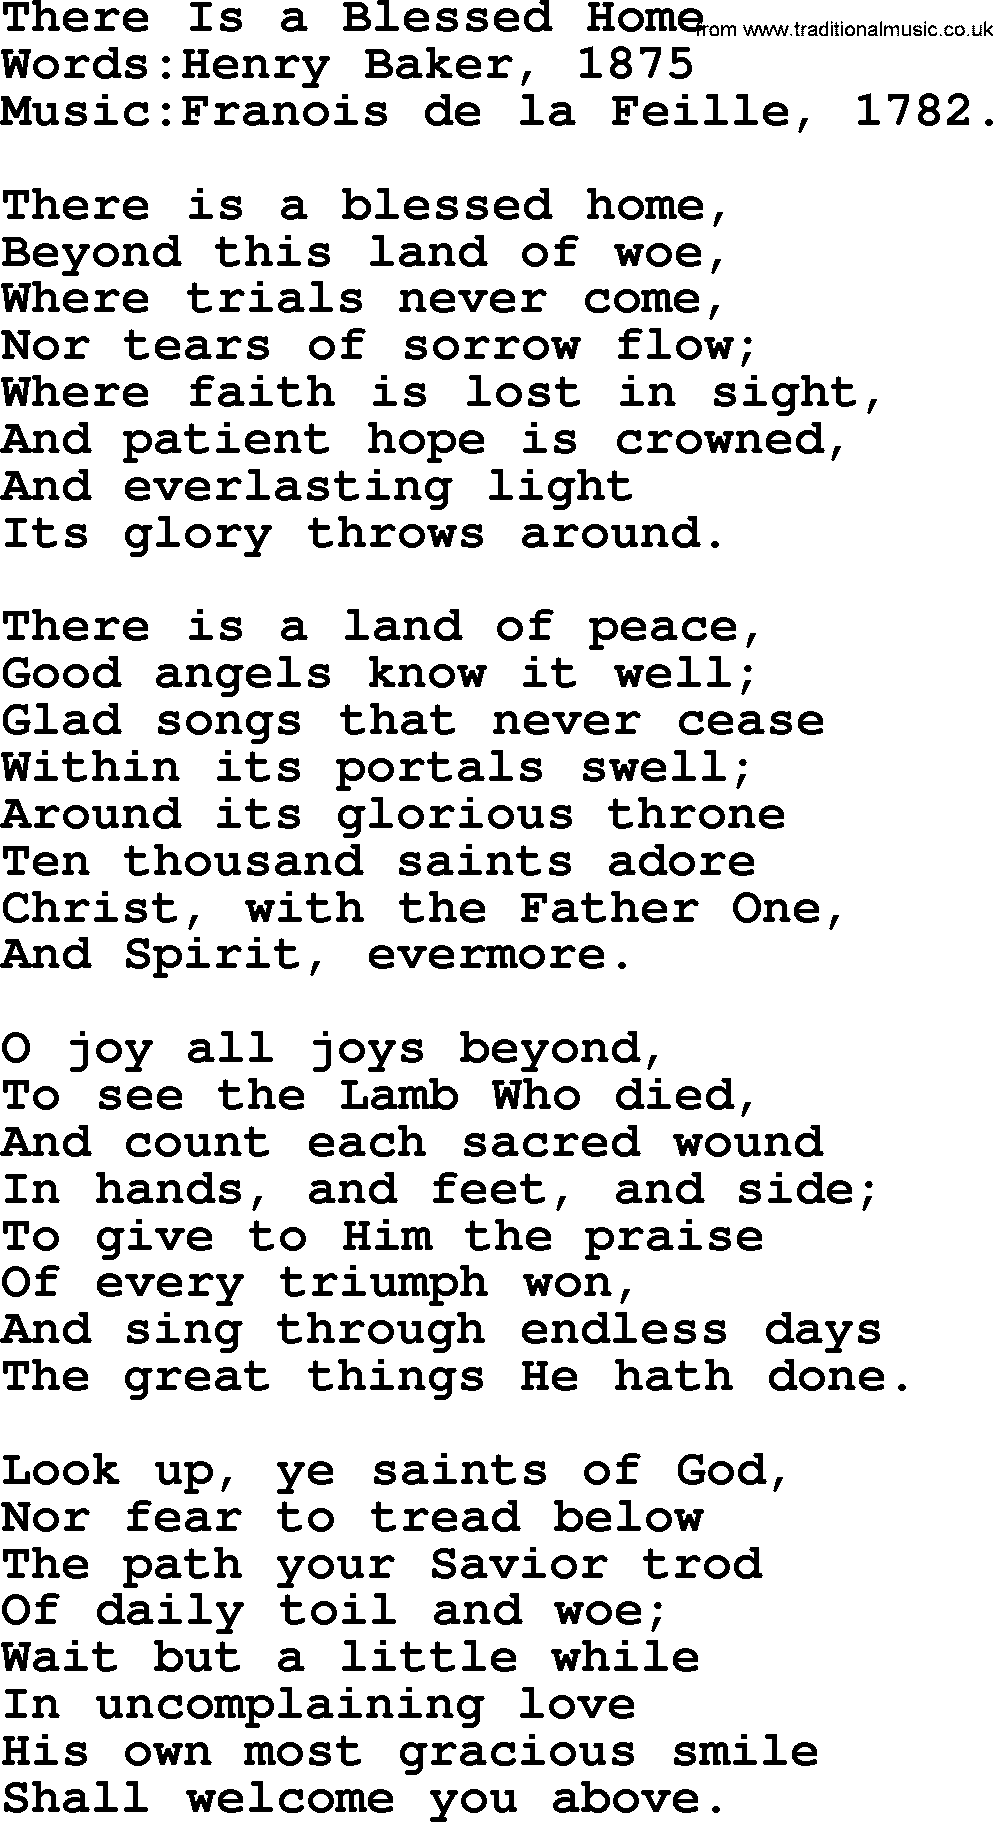 Songs and Hymns about Heaven: There Is A Blessed Home lyrics with PDF